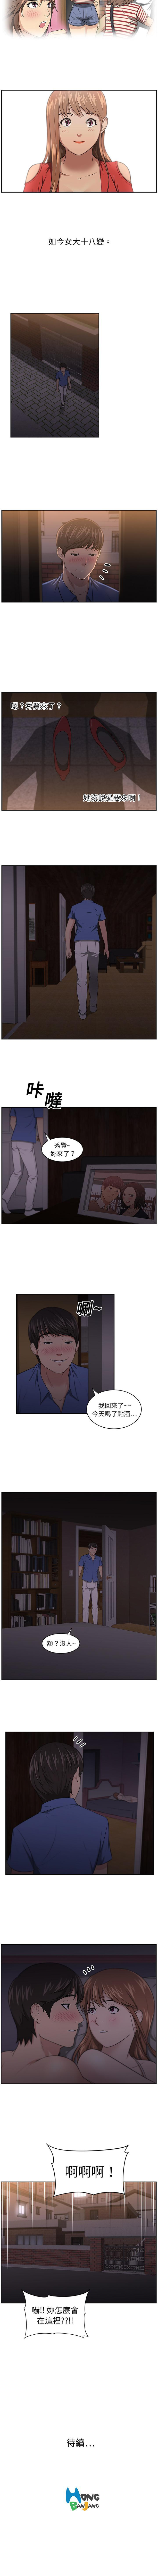 Chacal 大叔 1-25 Dorm - Page 3